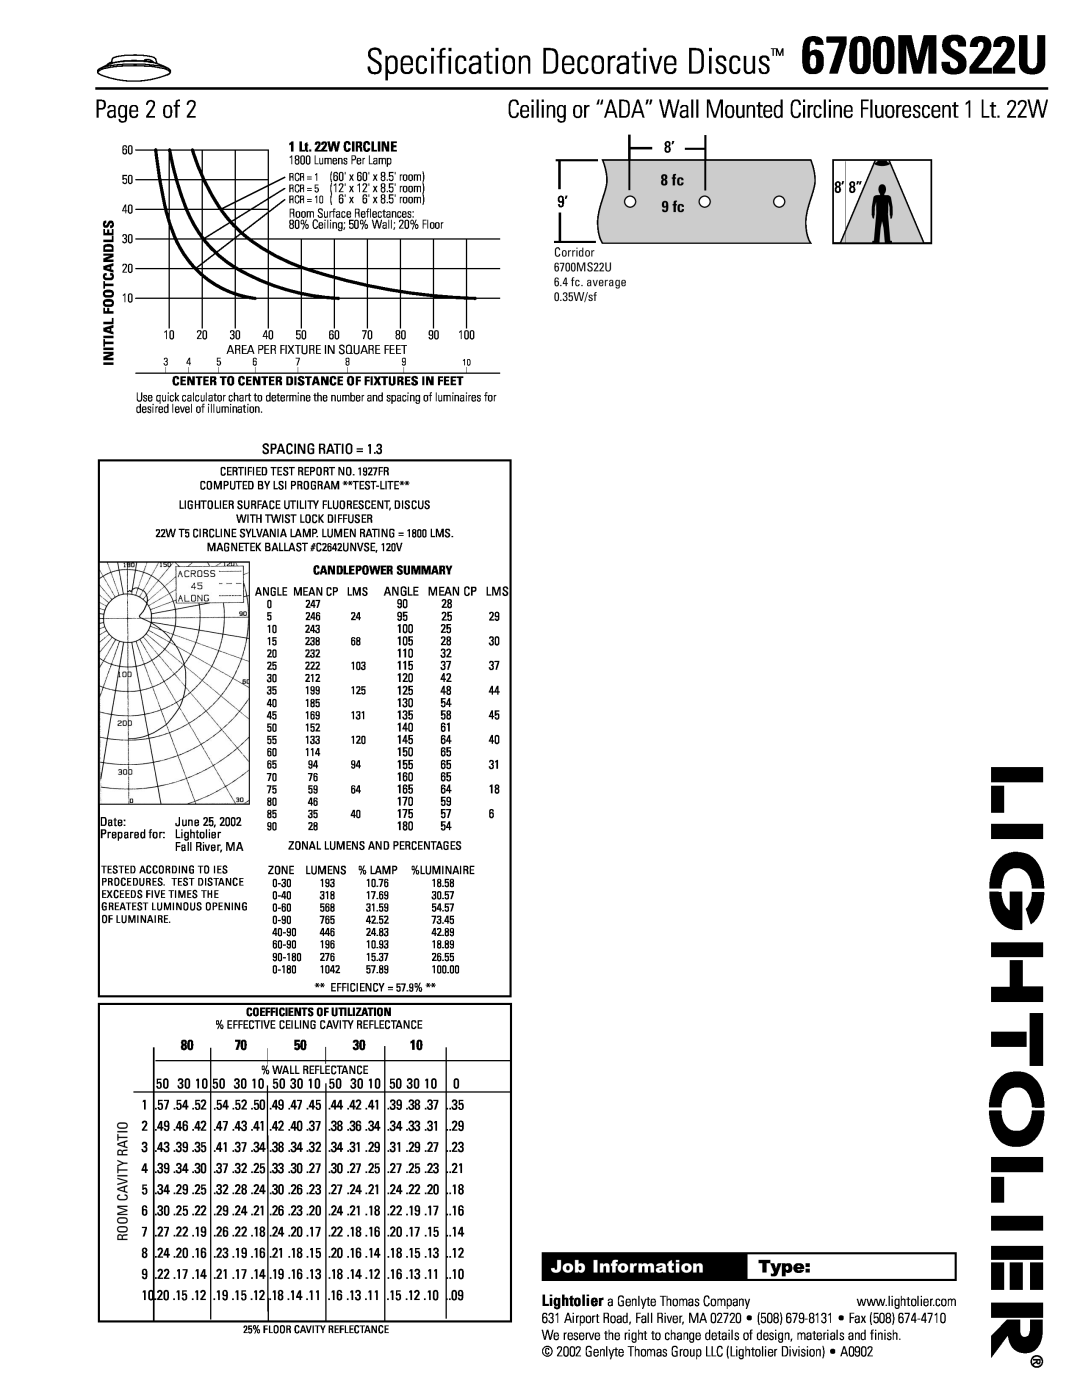 Lightolier Page 2 of, Initial Footcandles, 8 fc, 1 Lt. 22W CIRCLINE, Specification Decorative Discus 6700MS22U, Type 